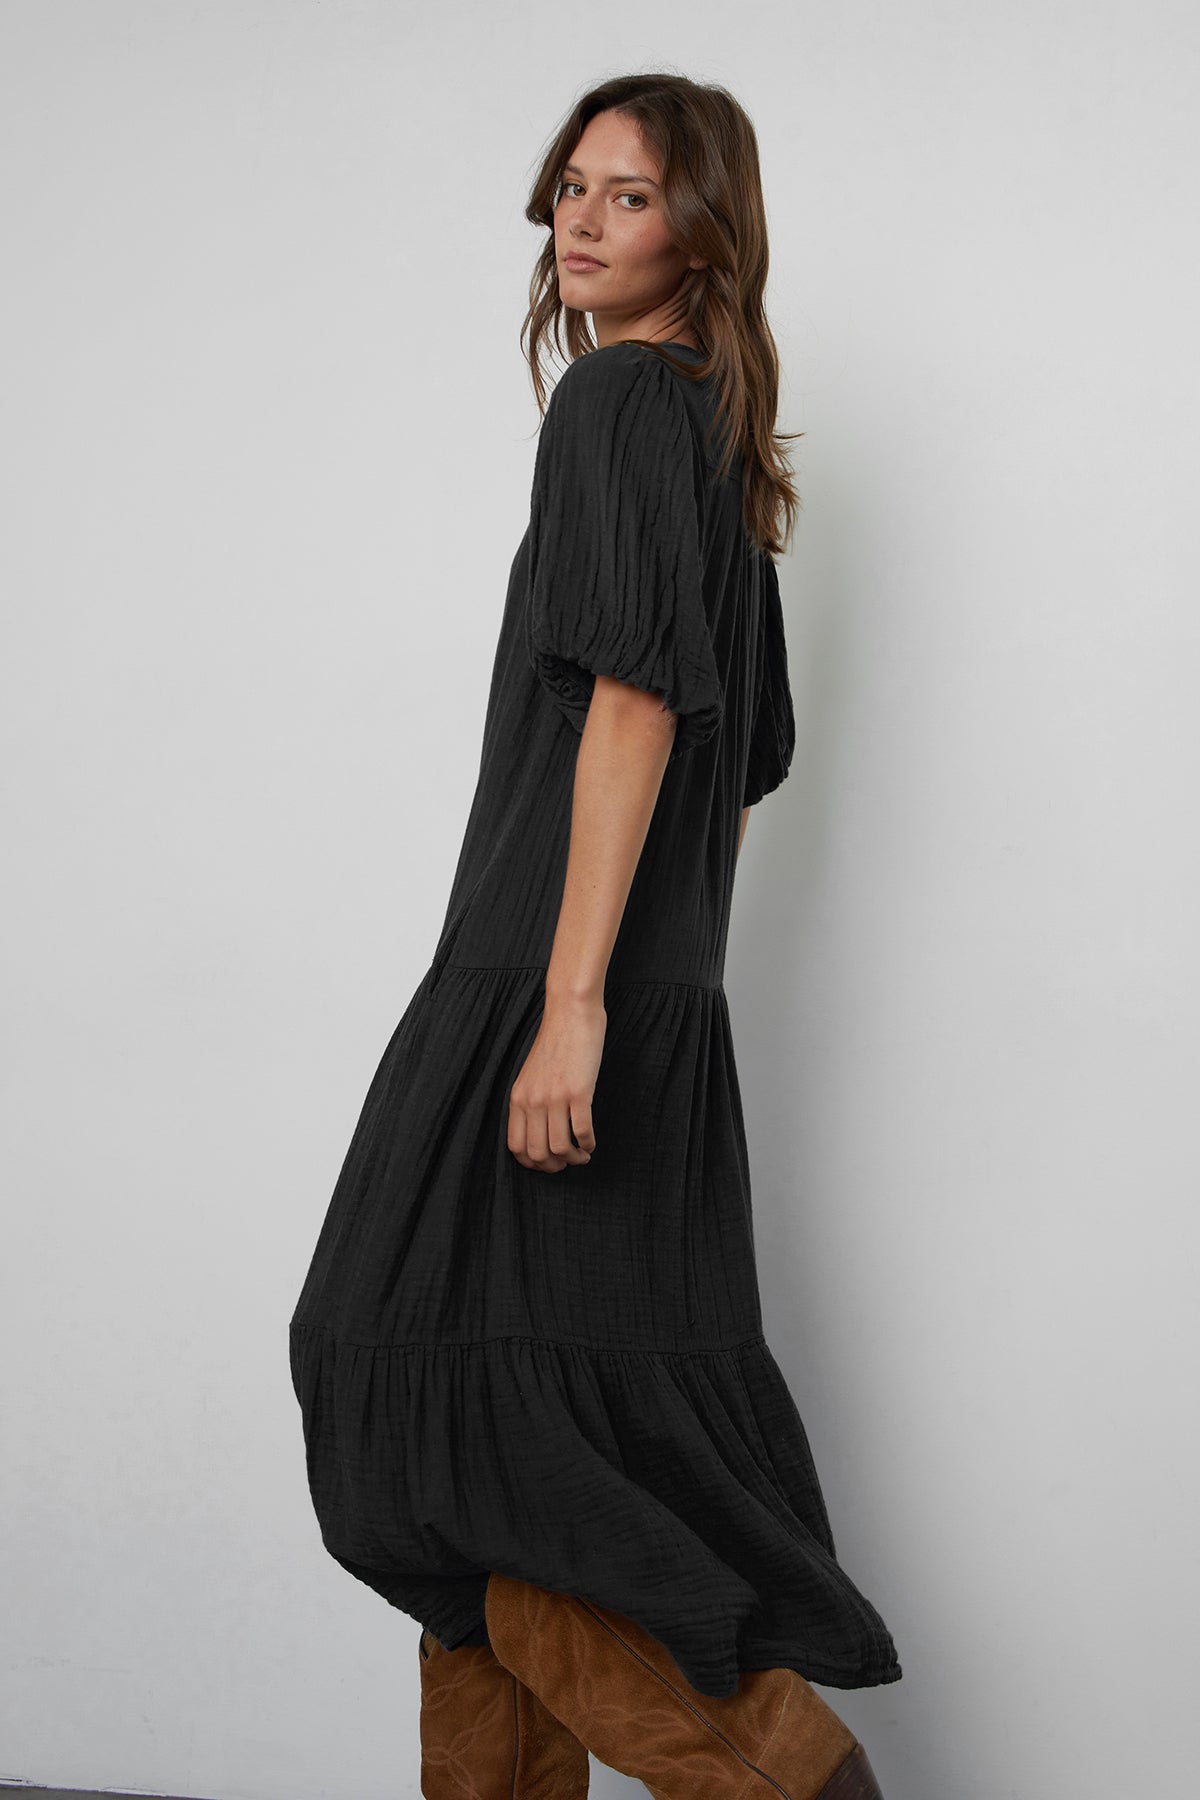   Pauline Cotton Gauze Midi Dress in Black side view with brown boots 